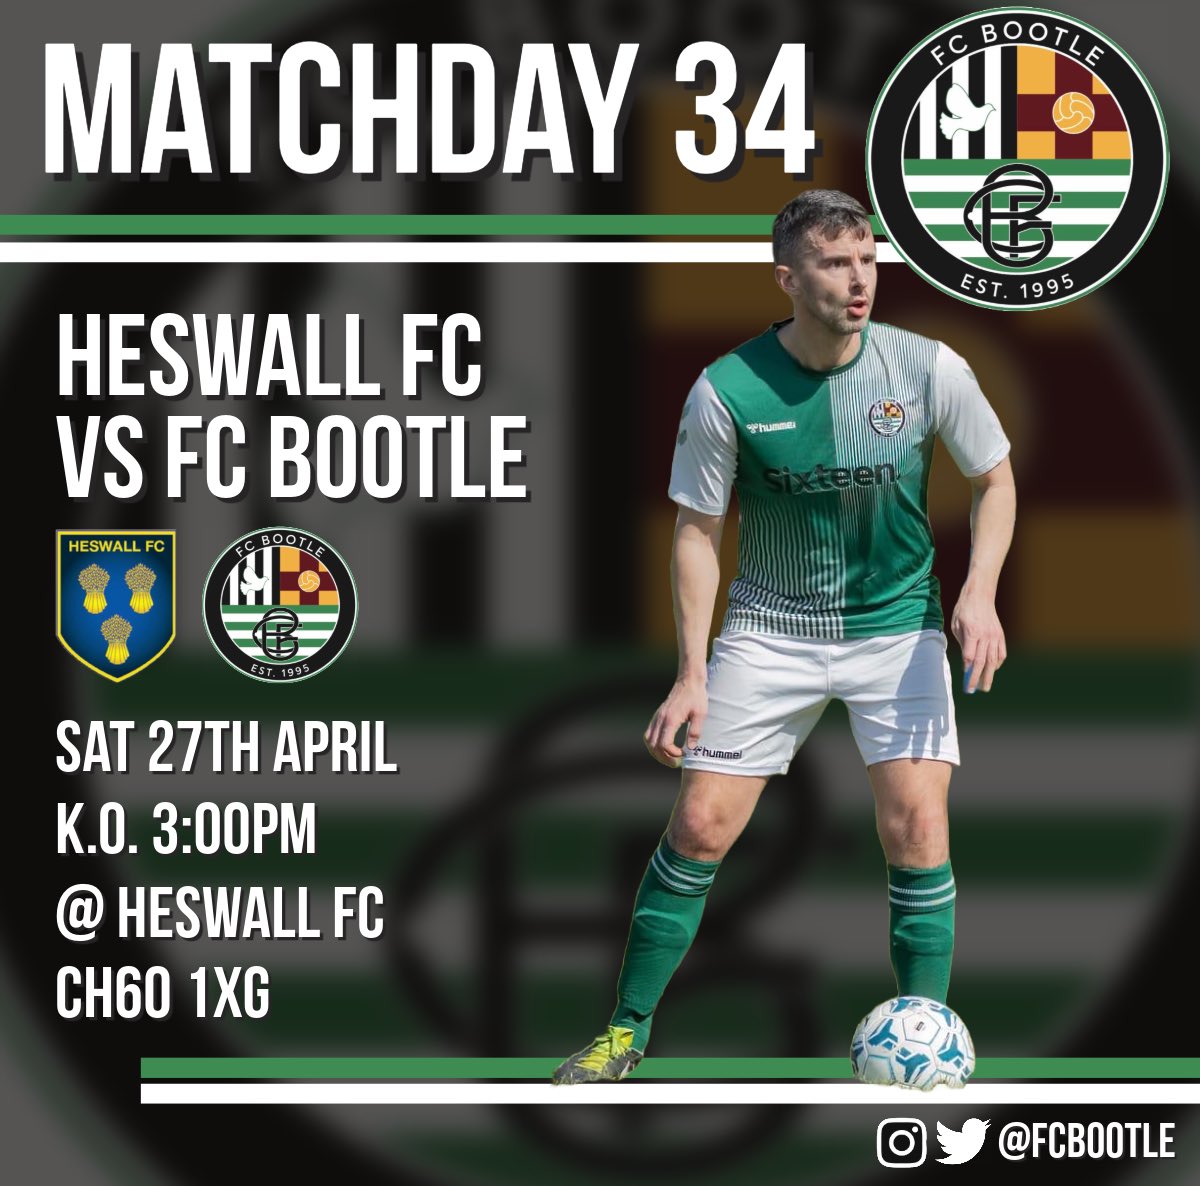 Next match… We travel to @HeswallFC_ this Saturday for our penultimate fixture of the season. Should be a good one. Come down and support the lads 💚